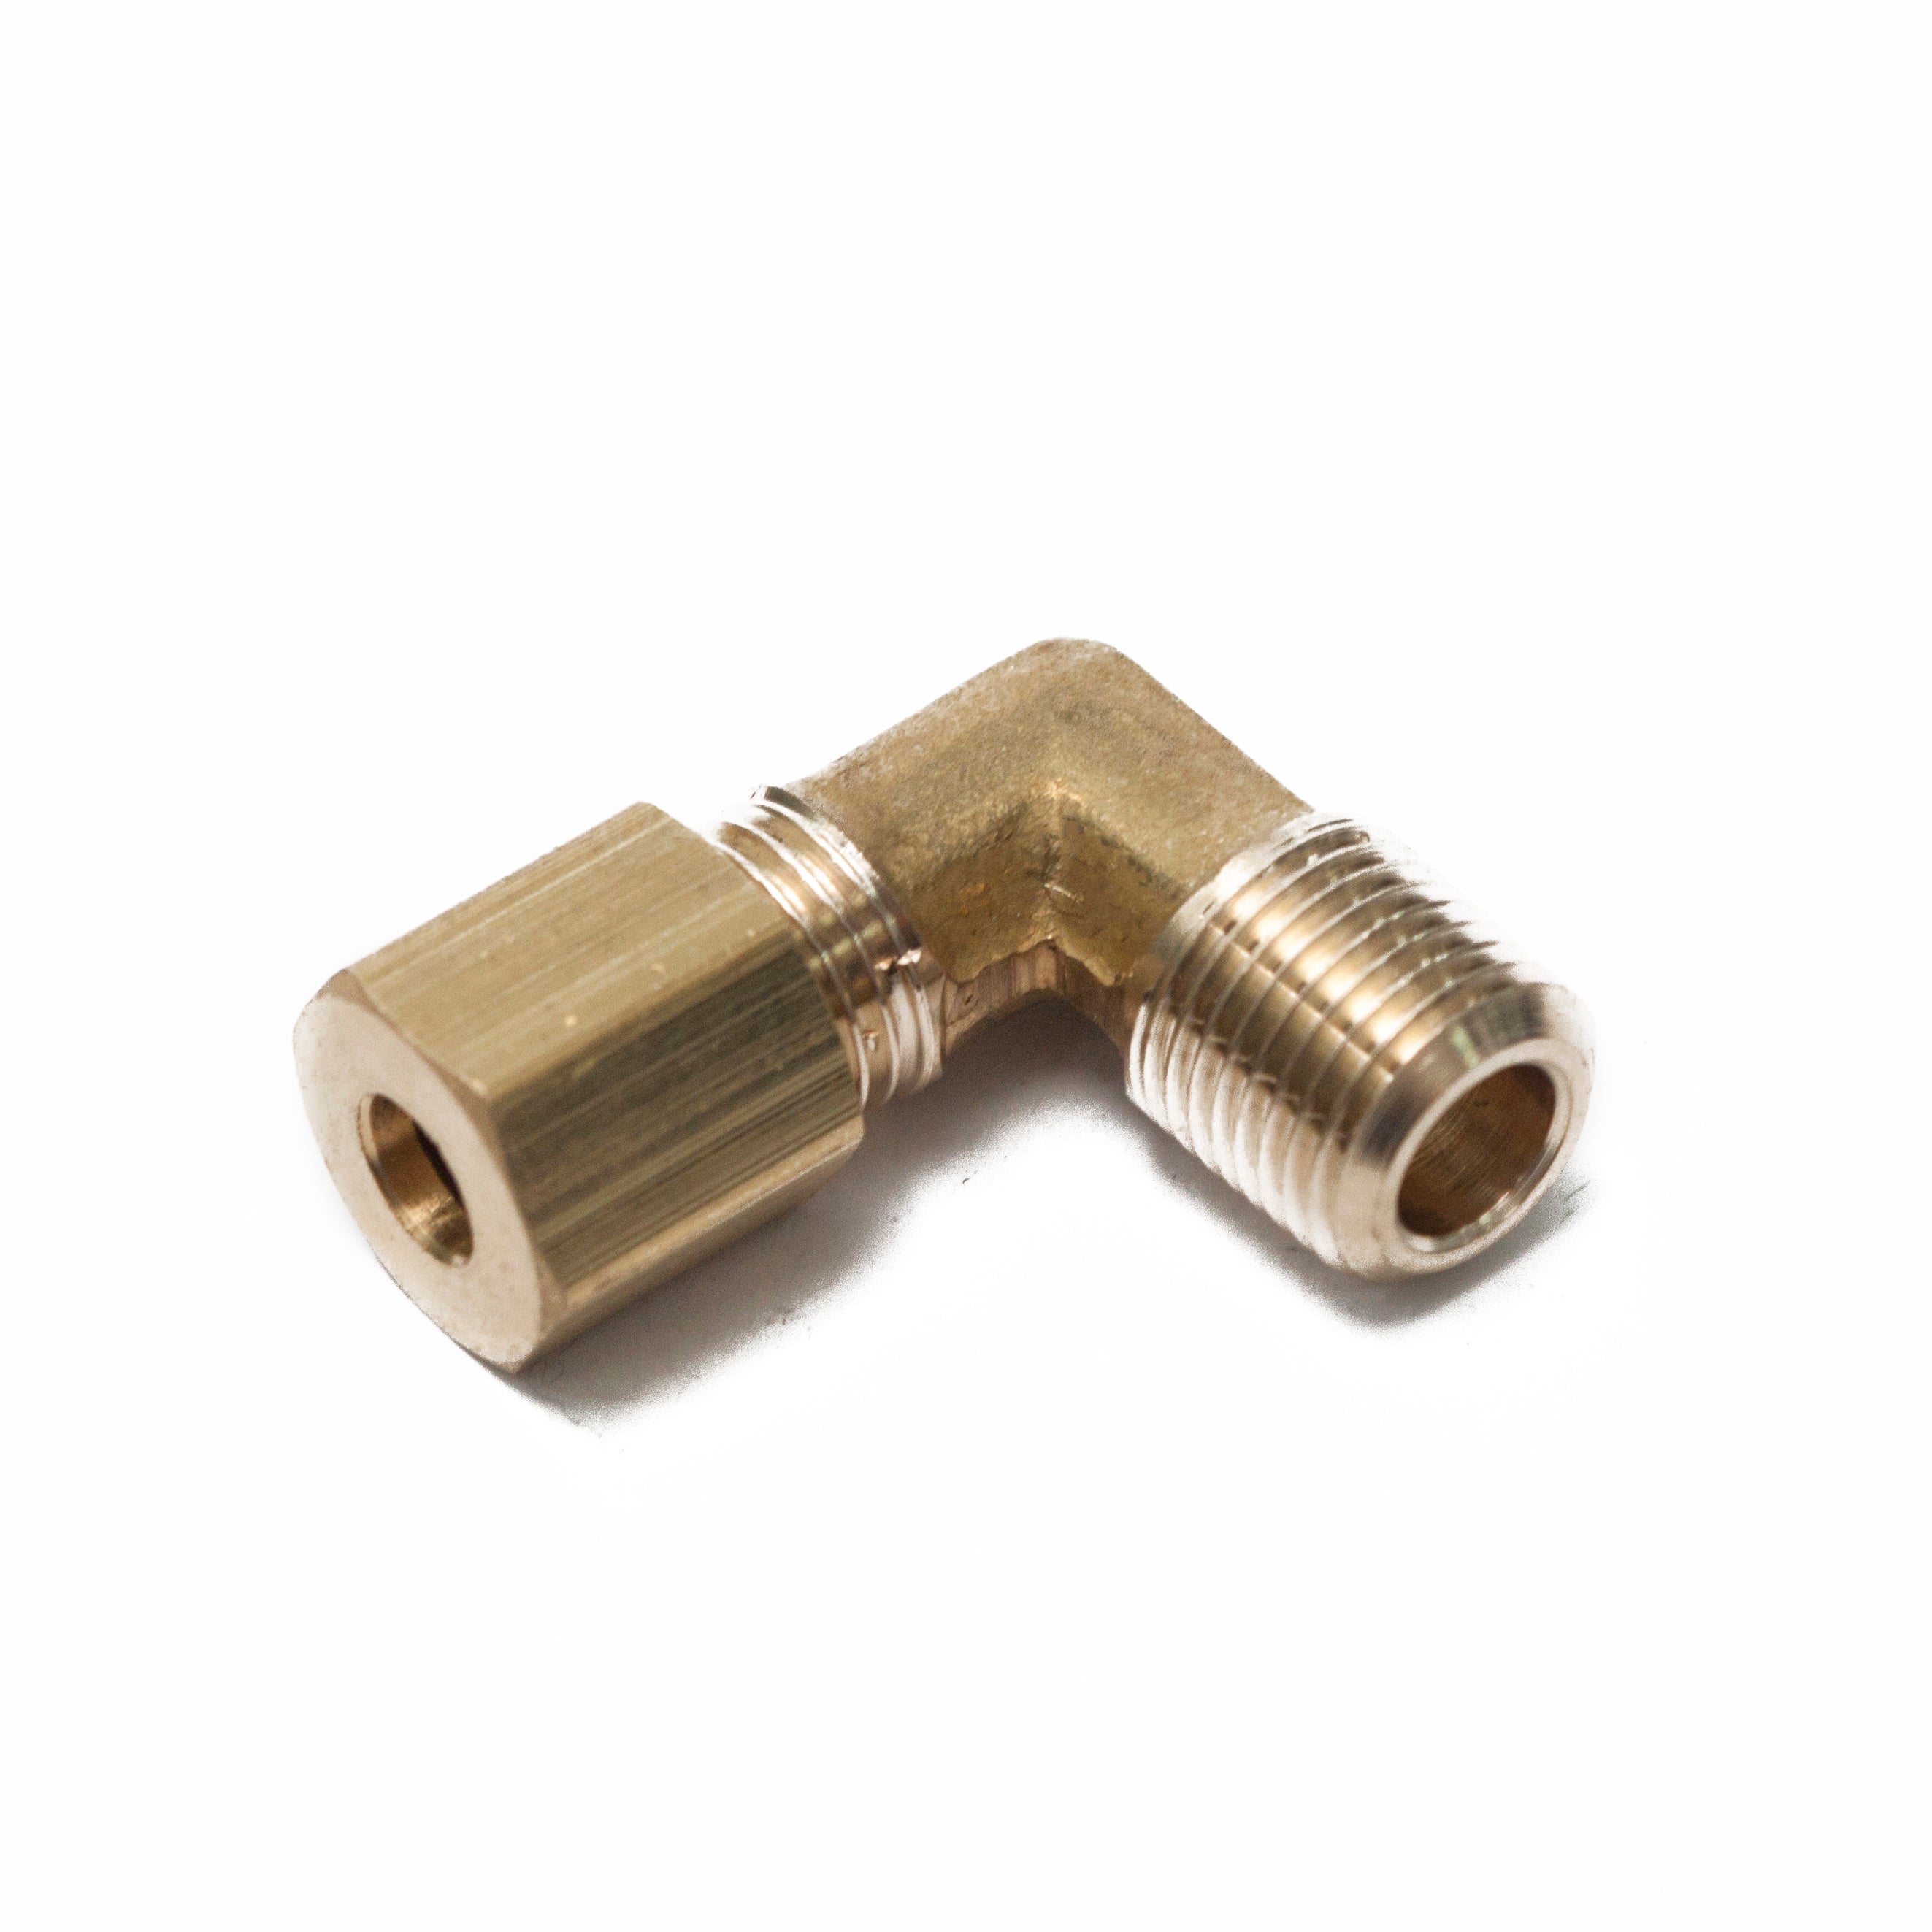 LTWFITTING 1/4-Inch OD Compression Union,Brass Compression Fitting(Pack of  30)